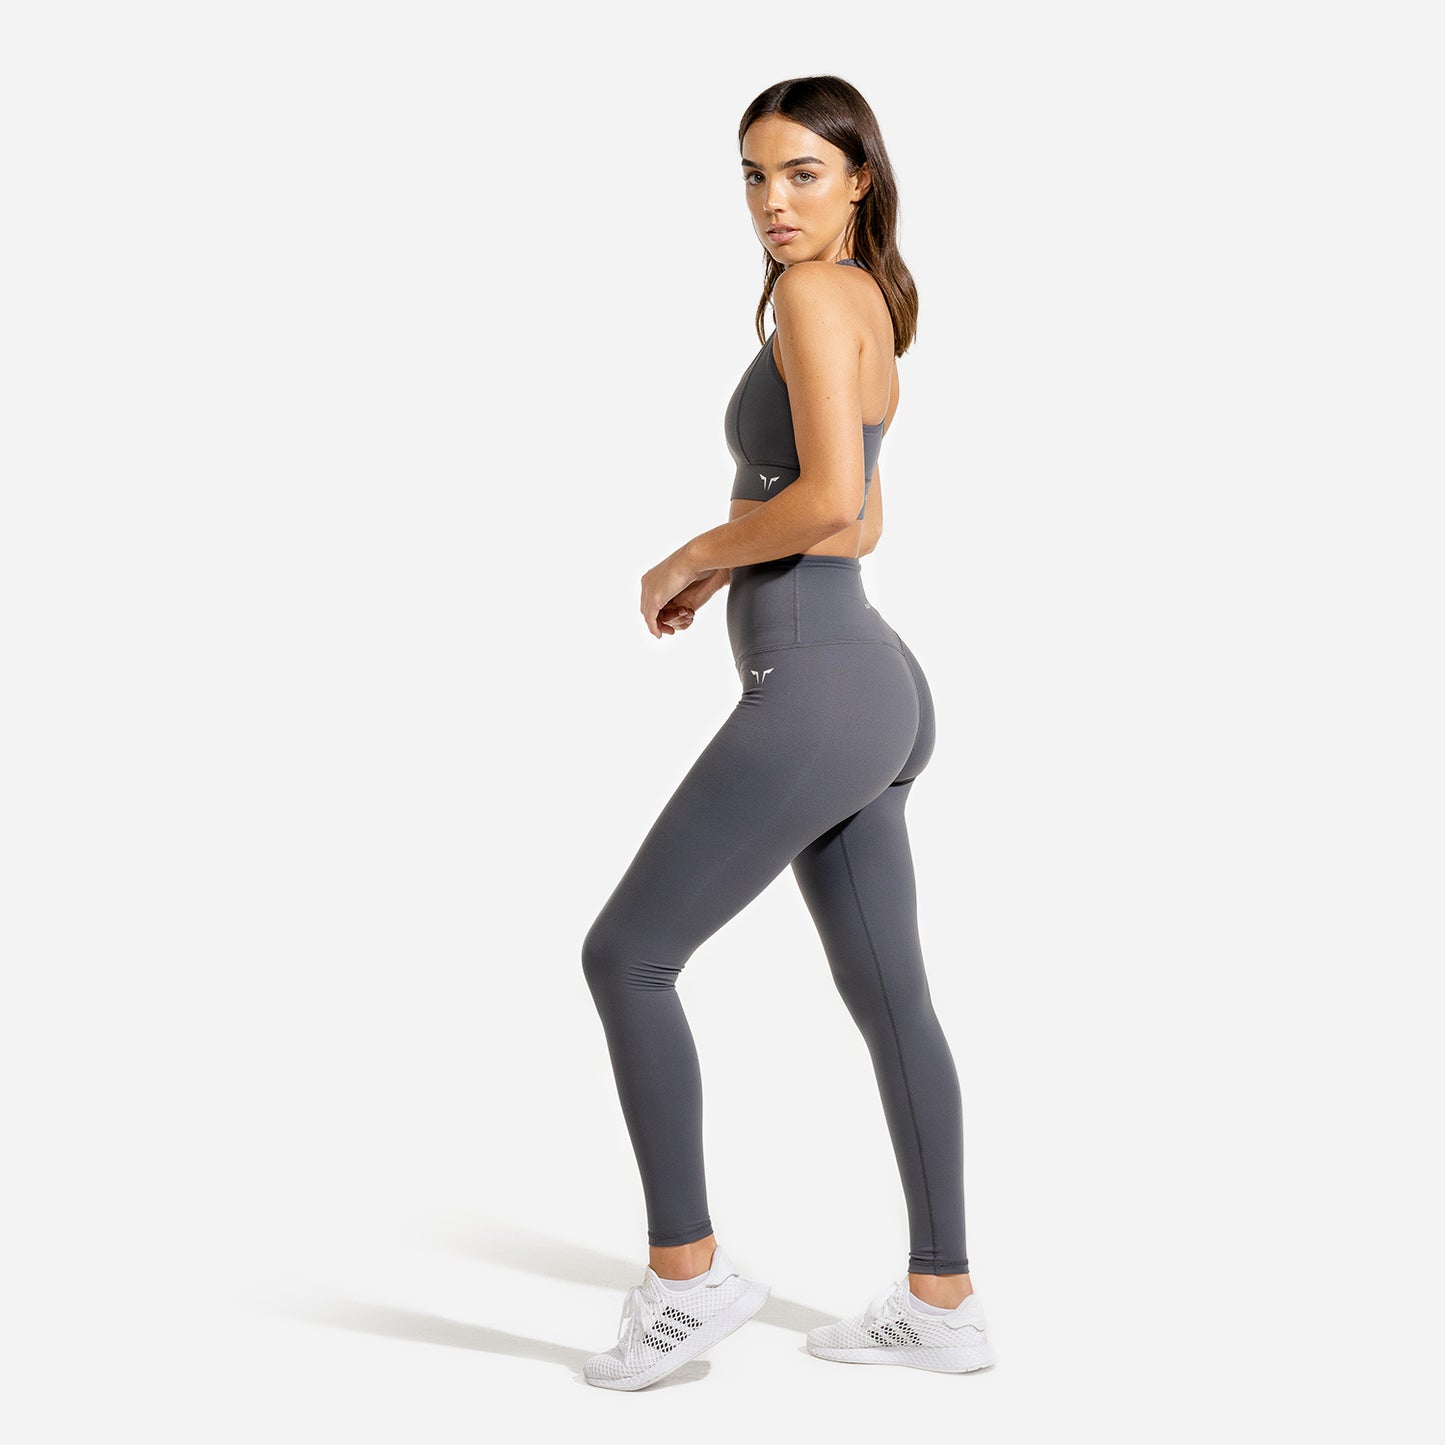 squatwolf-workout-clothes-hera-high-waisted-leggings-charcoal-gym-leggings-for-women